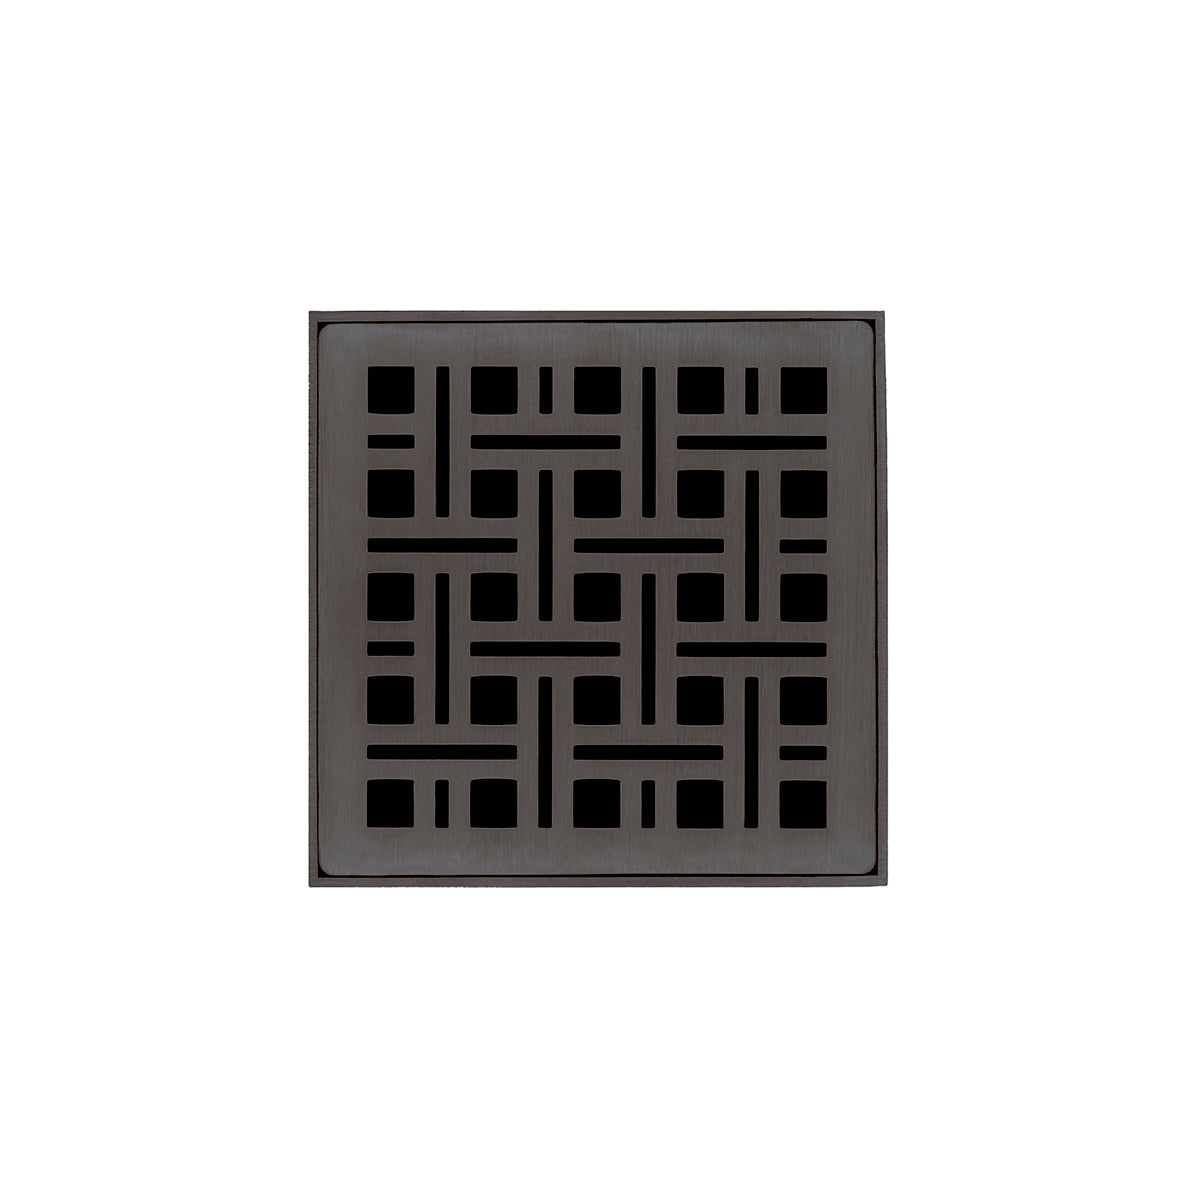 Infinity Drain 4" x 4" VD 4 Premium Center Drain Kit with Weave Pattern Decorative Plate with PVC Drain Body, 2" Outlet